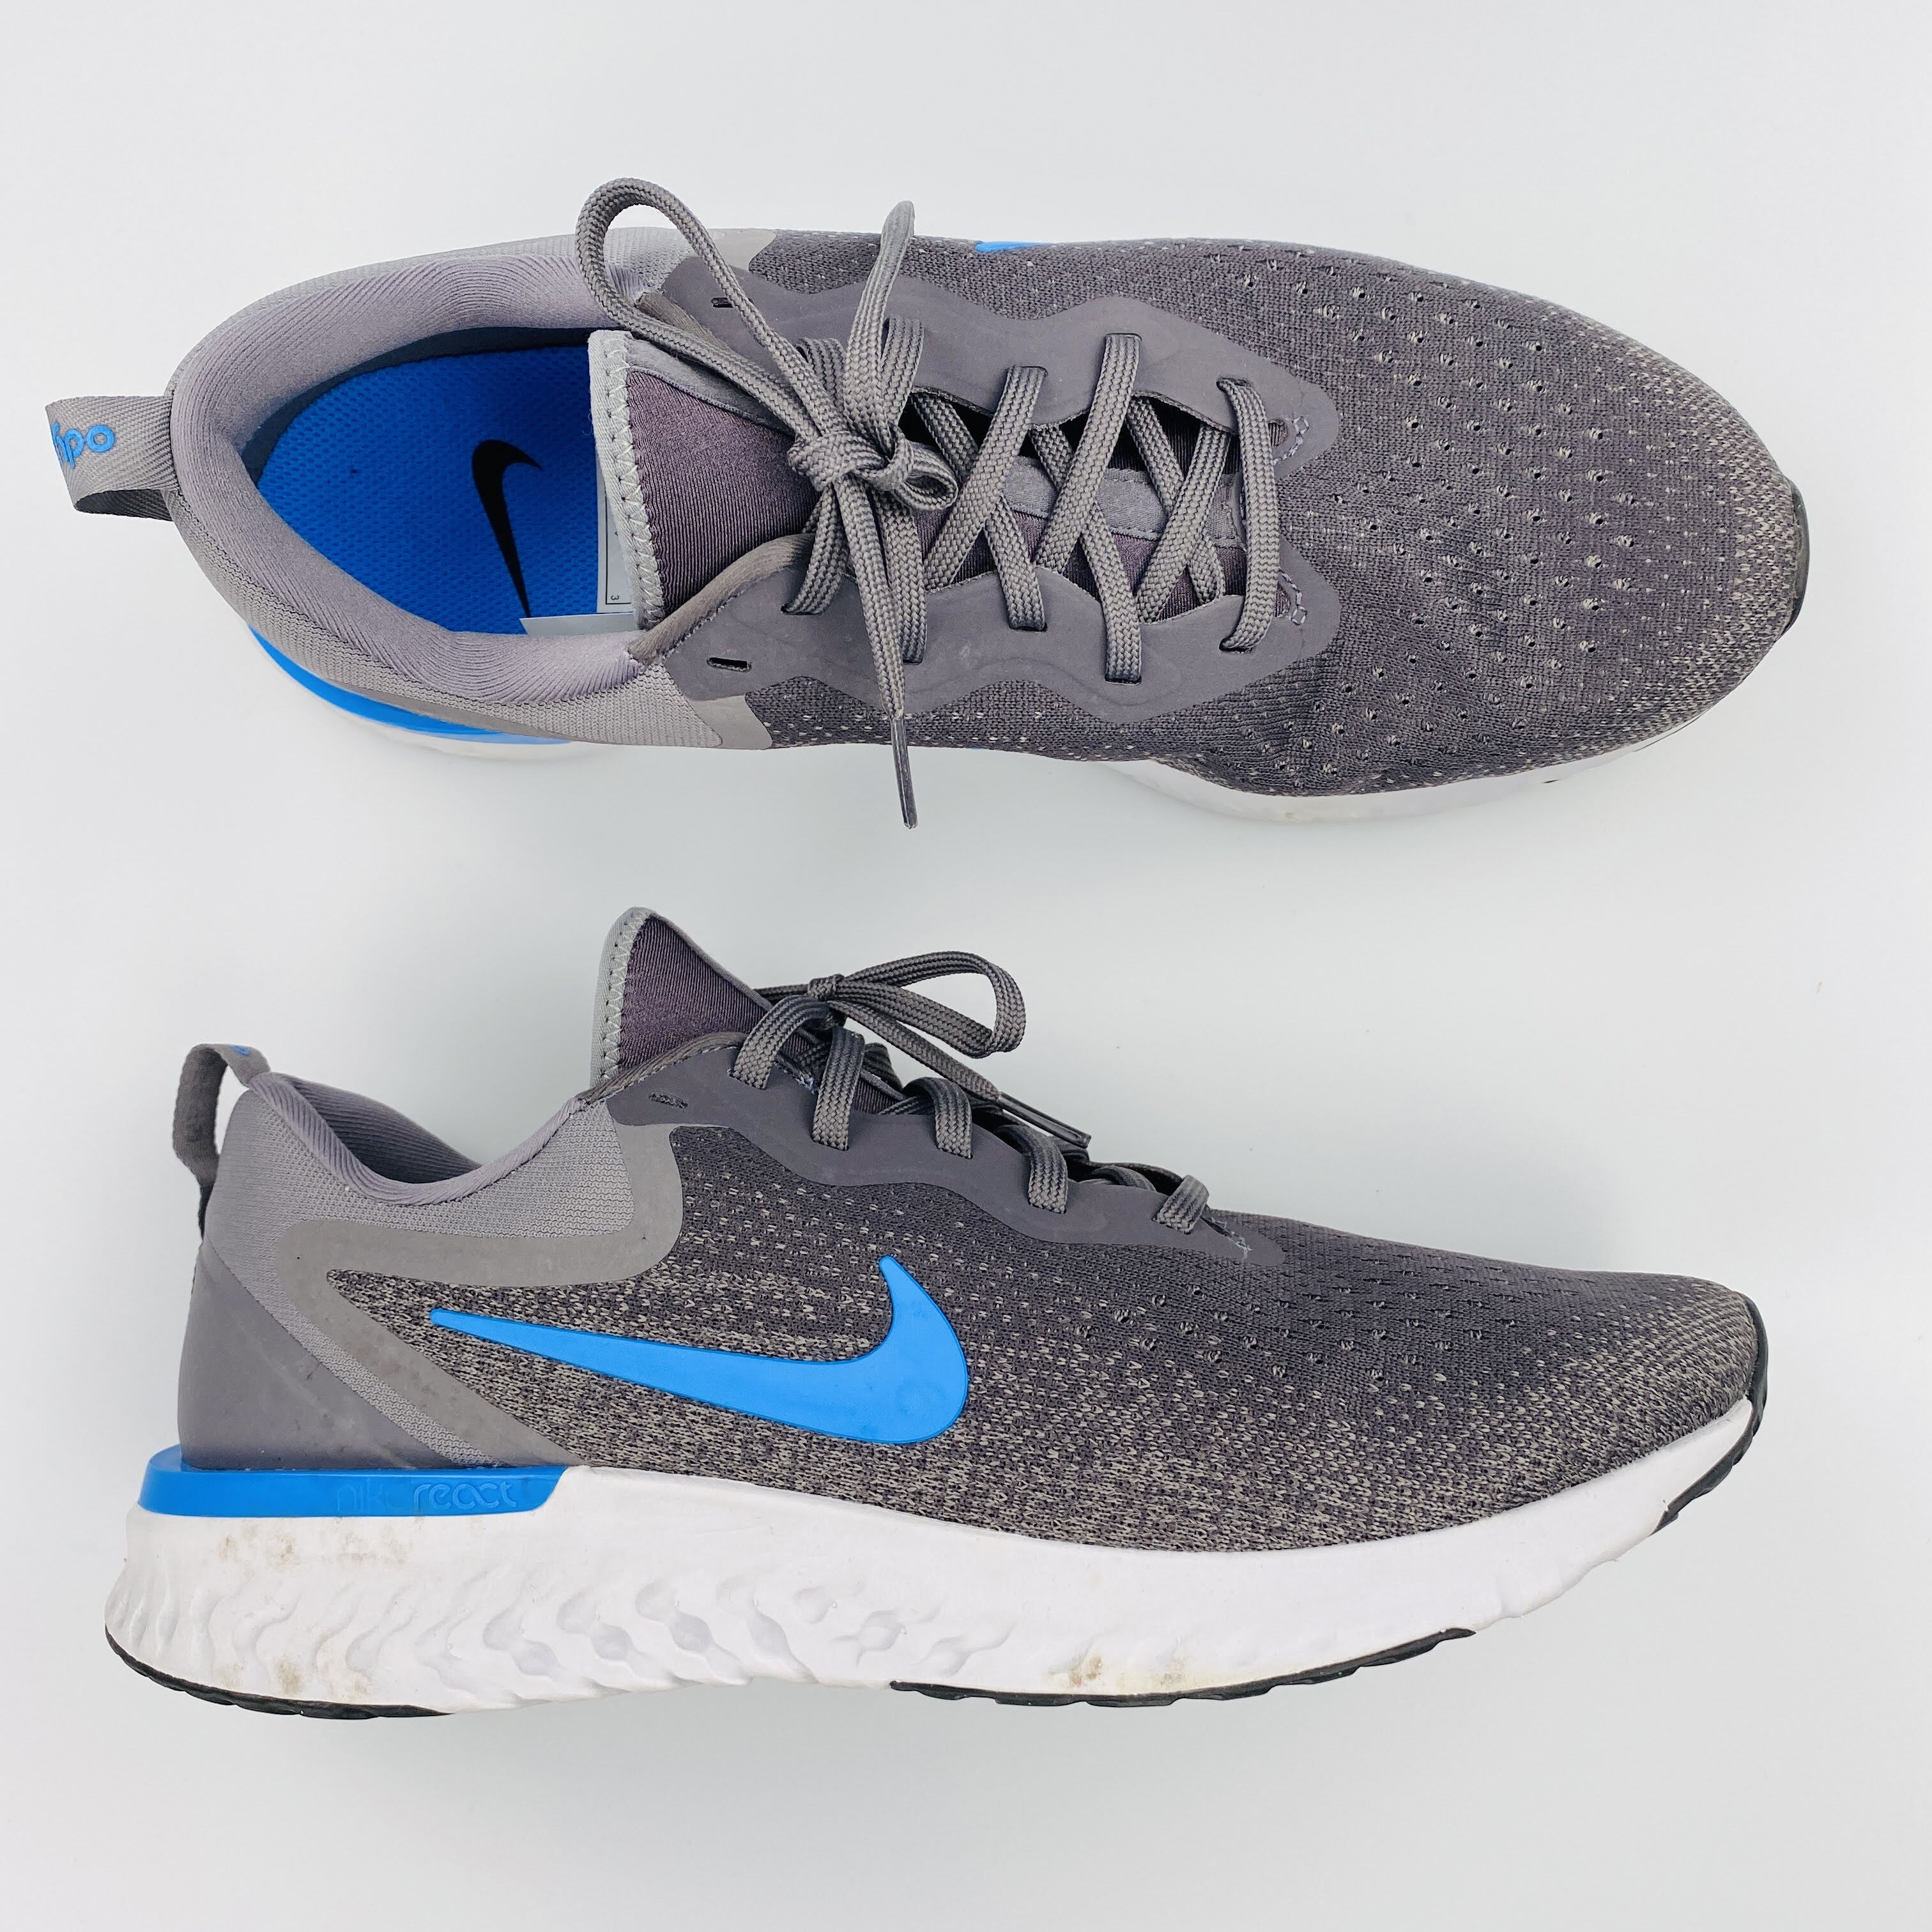 Nike Odyssey React - Seconde main Chaussures running homme - Gris - 45 | Hardloop